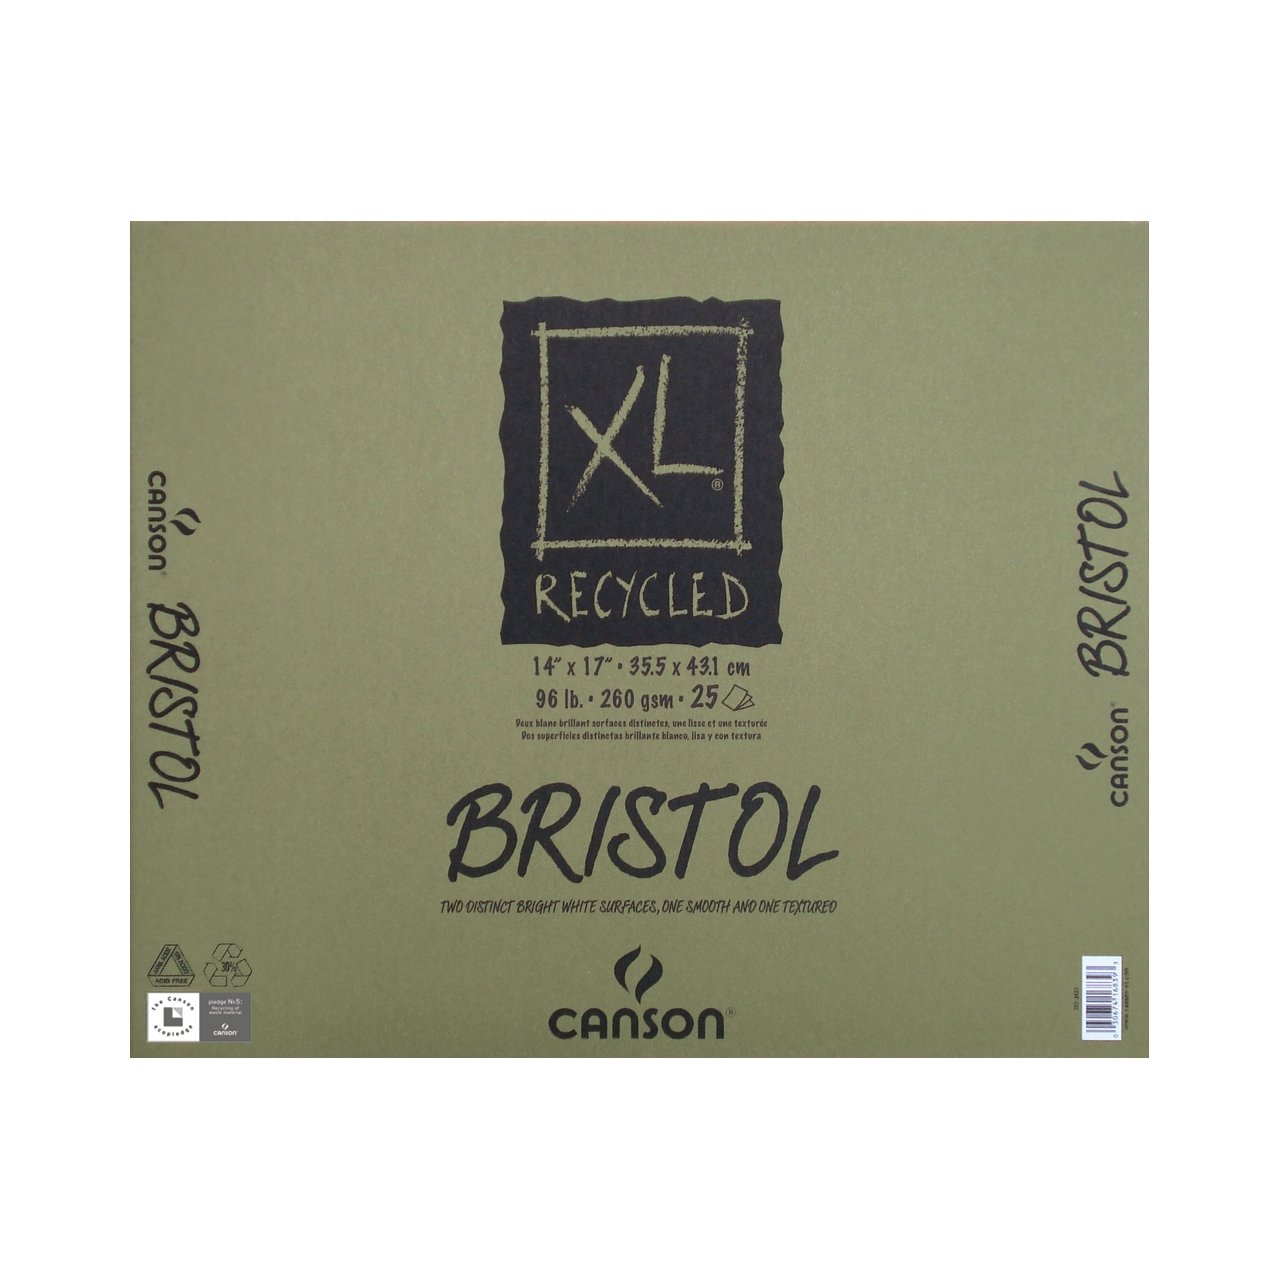 Canson XL Recycled Bristol - 25 Sheet Pad - 14x17 inch - merriartist.com